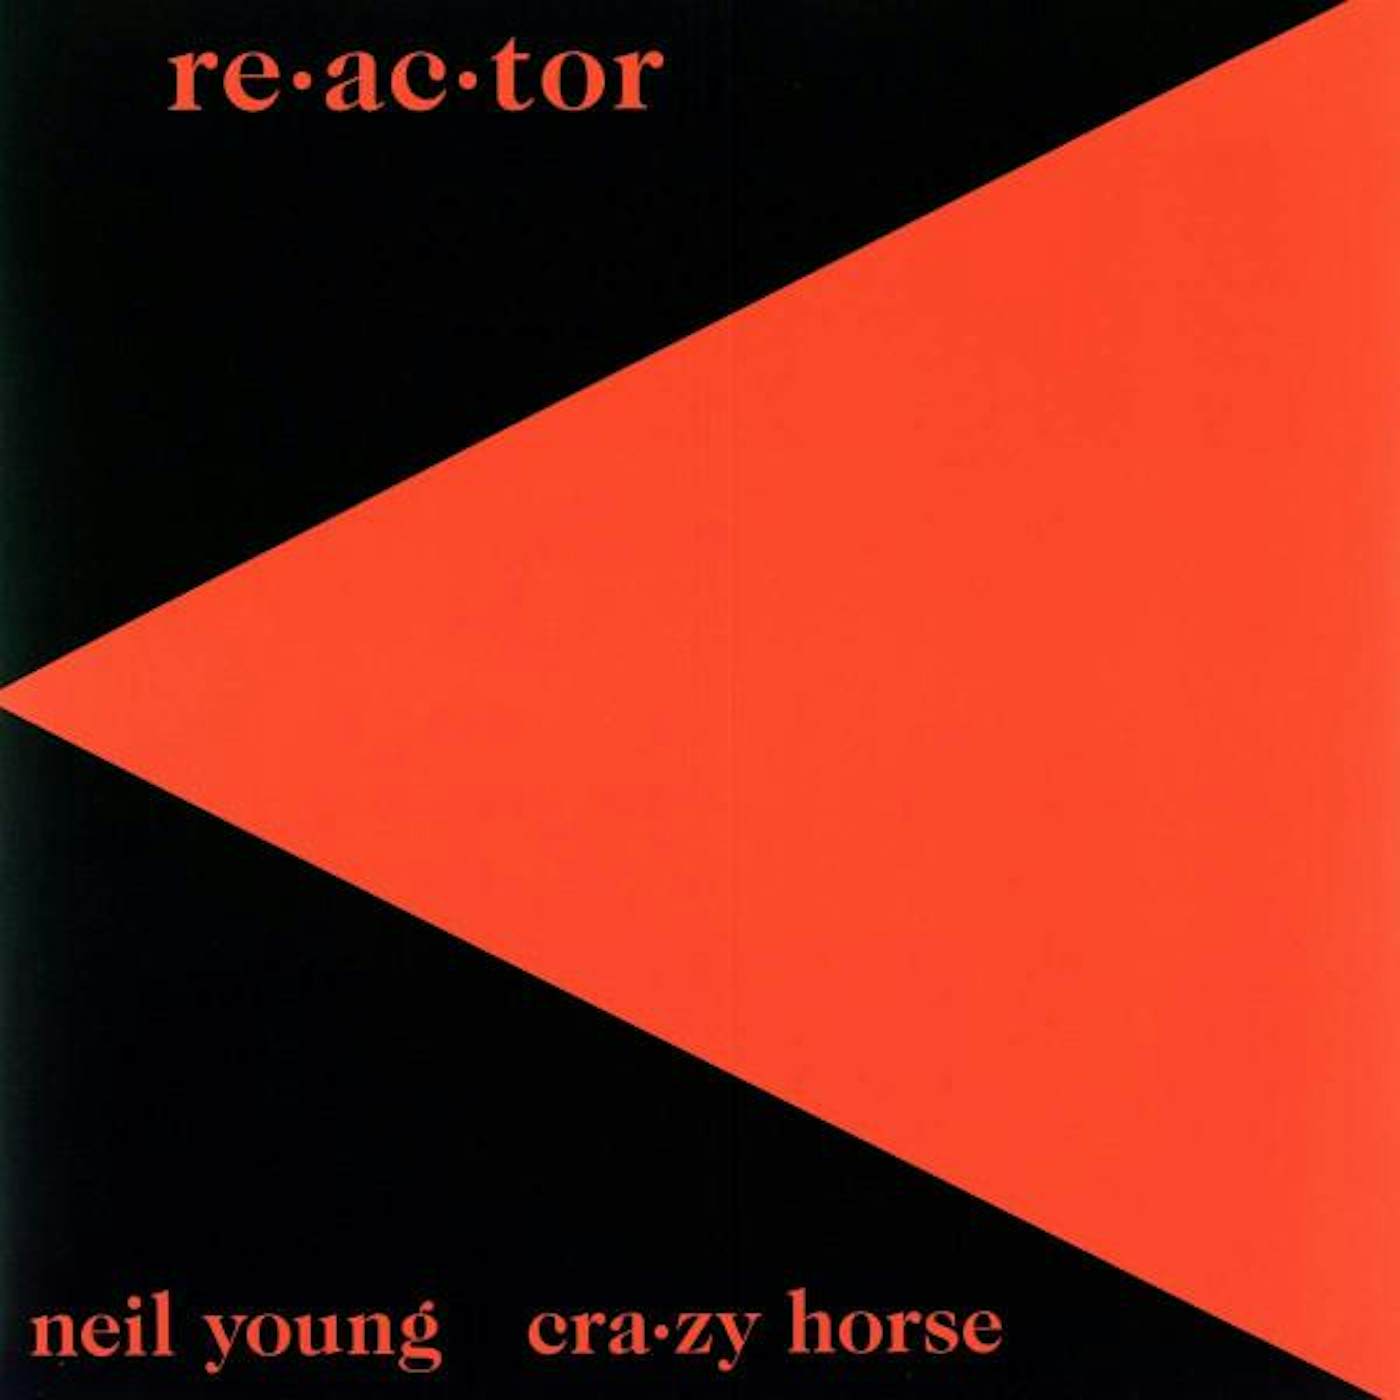 Neil Young & Crazy Horse RE-AC-TOR Vinyl Record